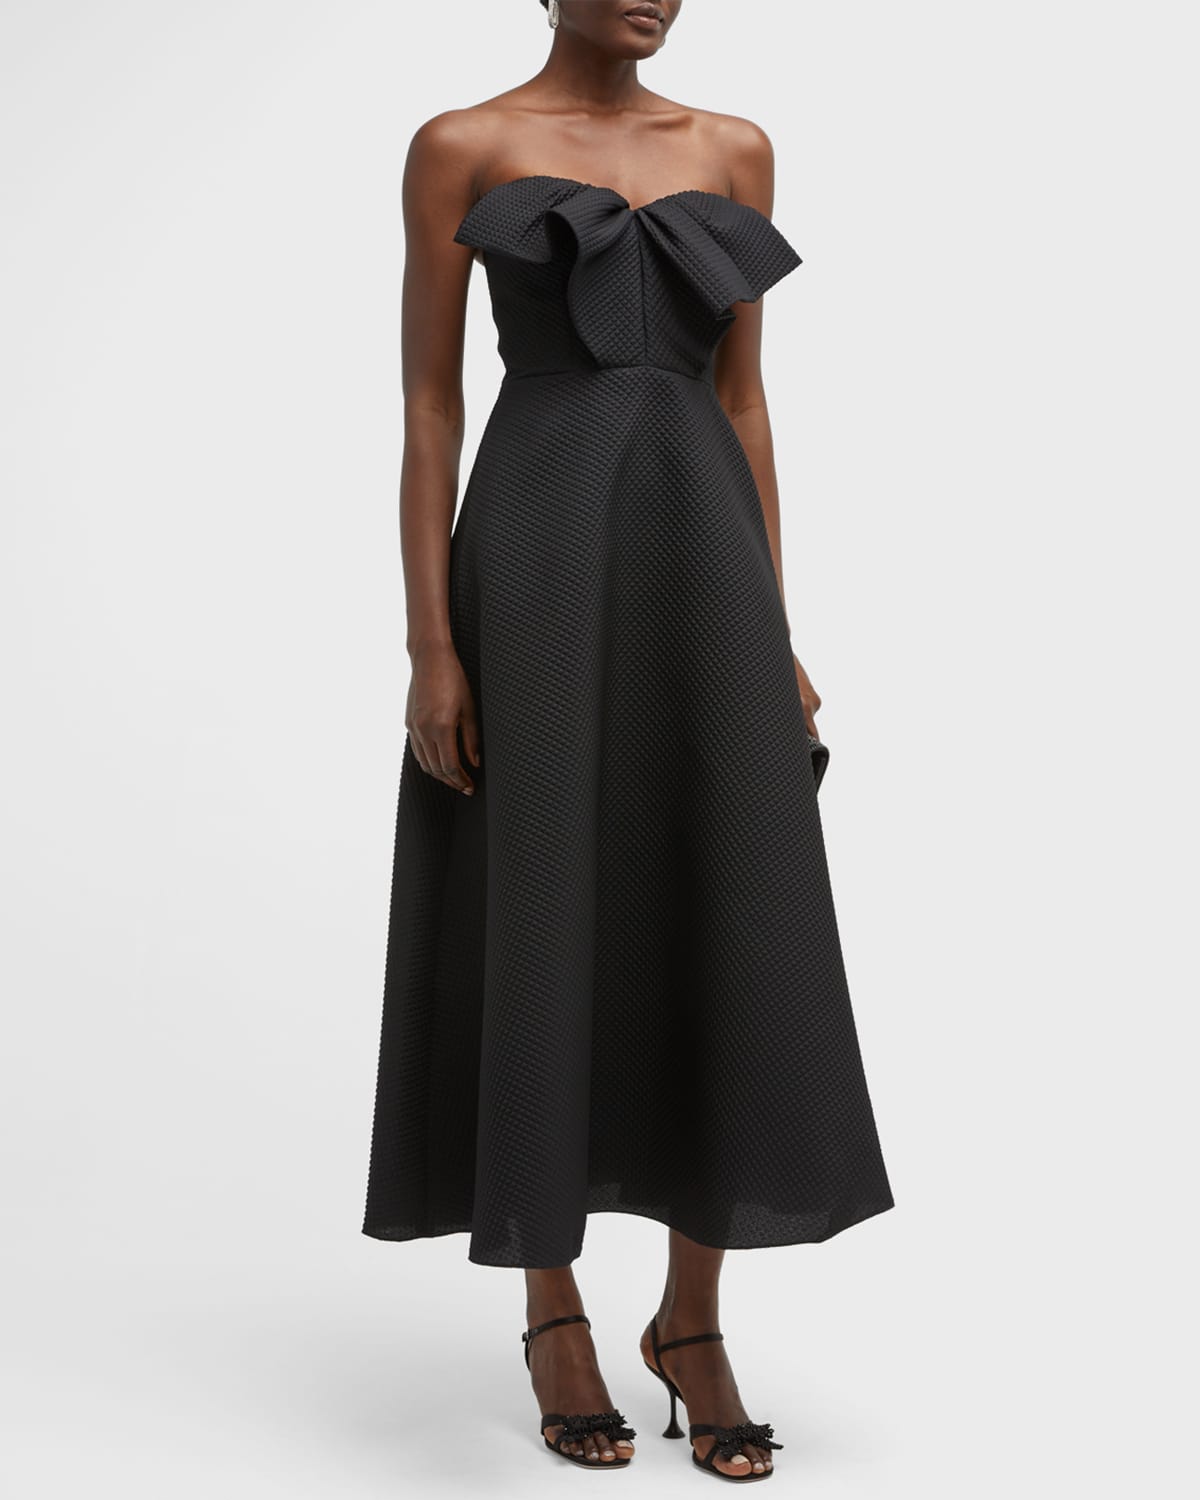 Lela Rose Scallop Cutout Quilted Midi Dress | Neiman Marcus